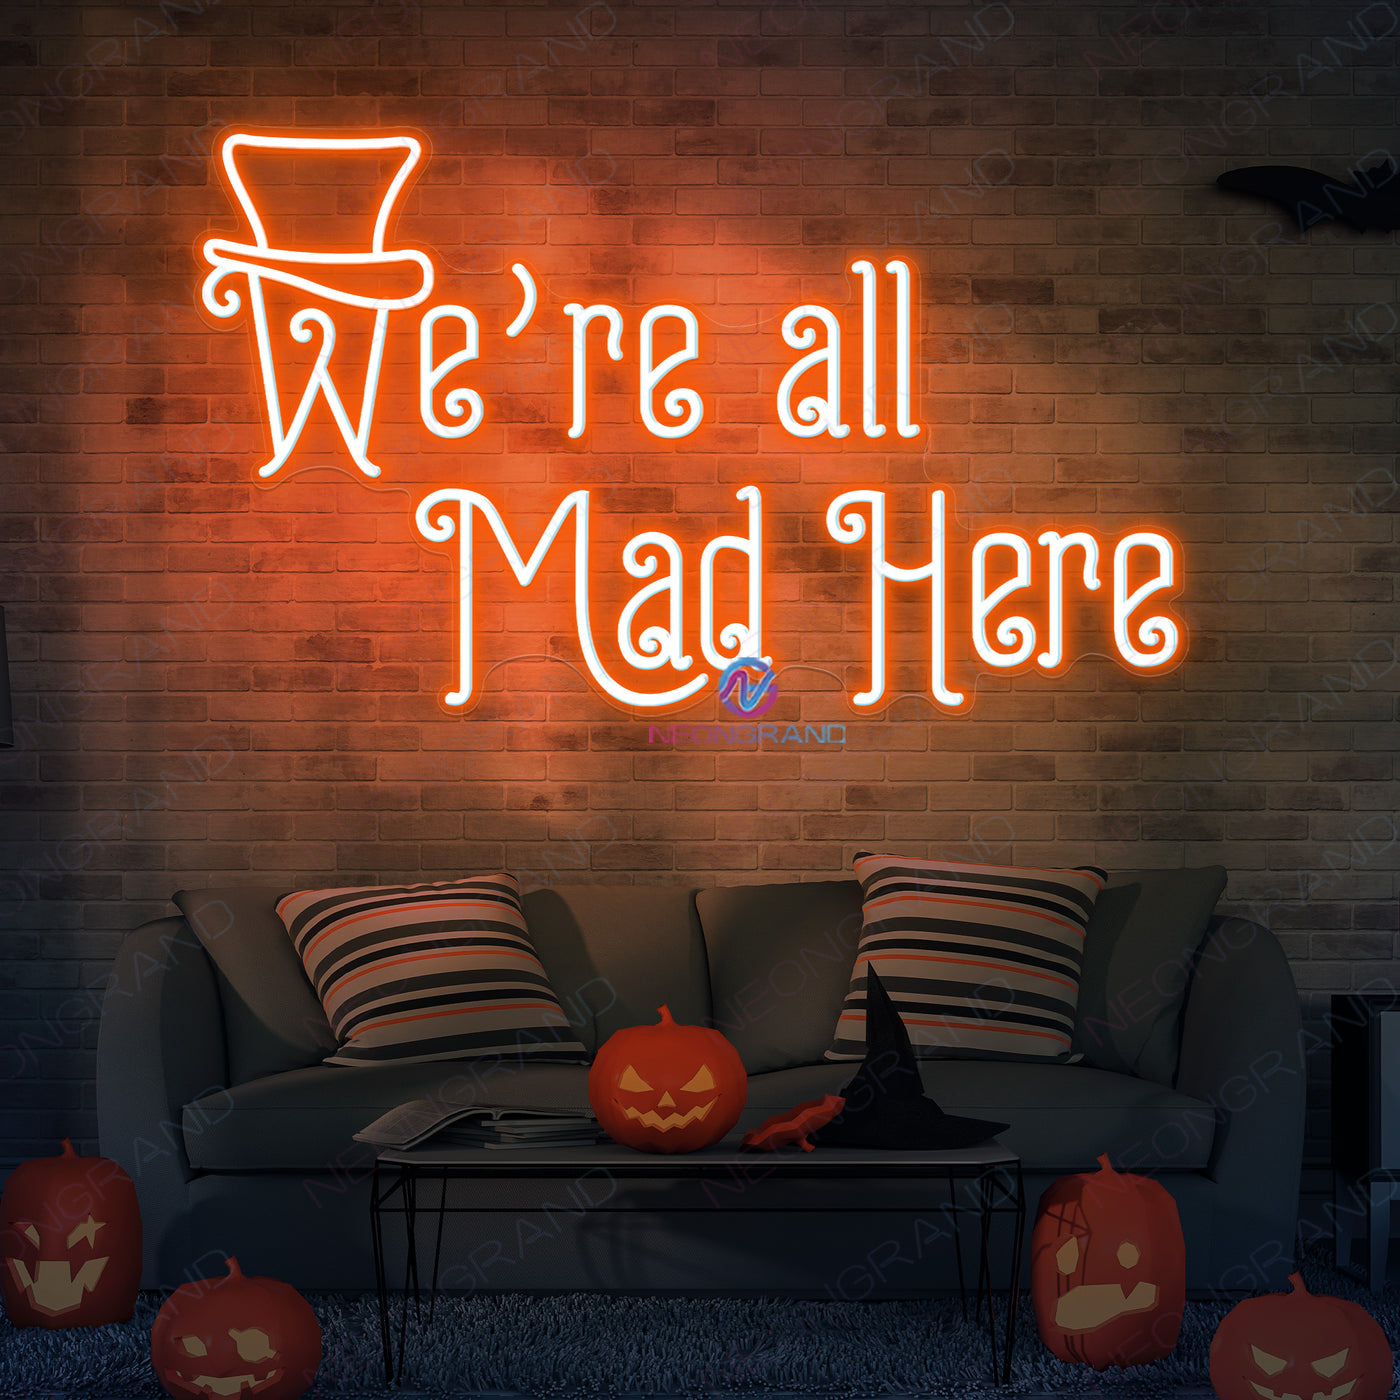 We're All Mad Here Neon Sign Halloween Led Light